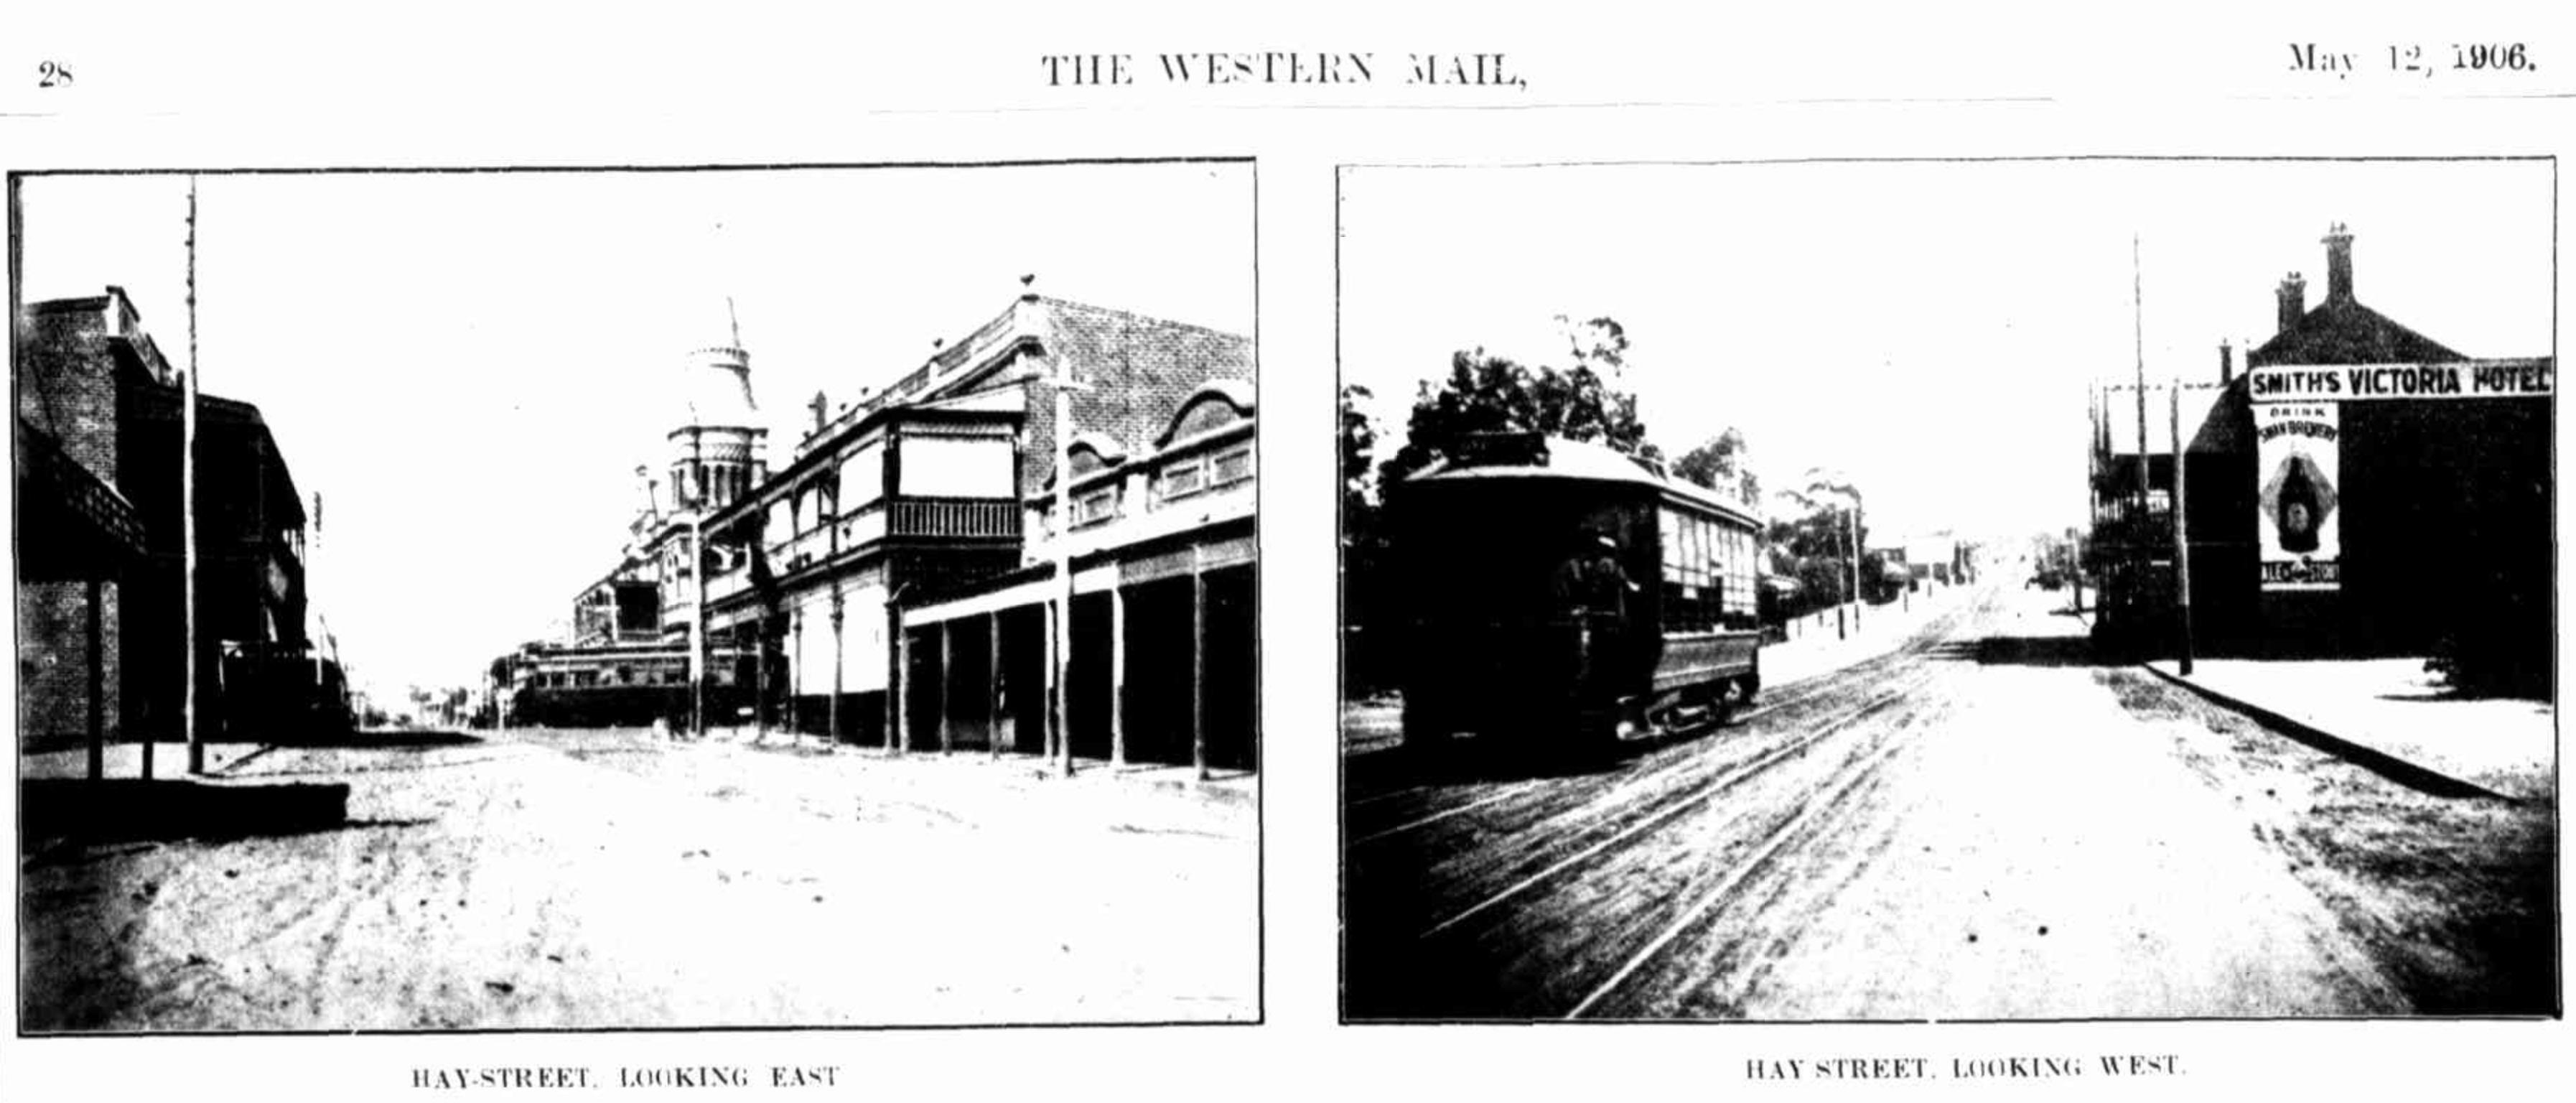 two newspaper images of Hay Street looking east and west